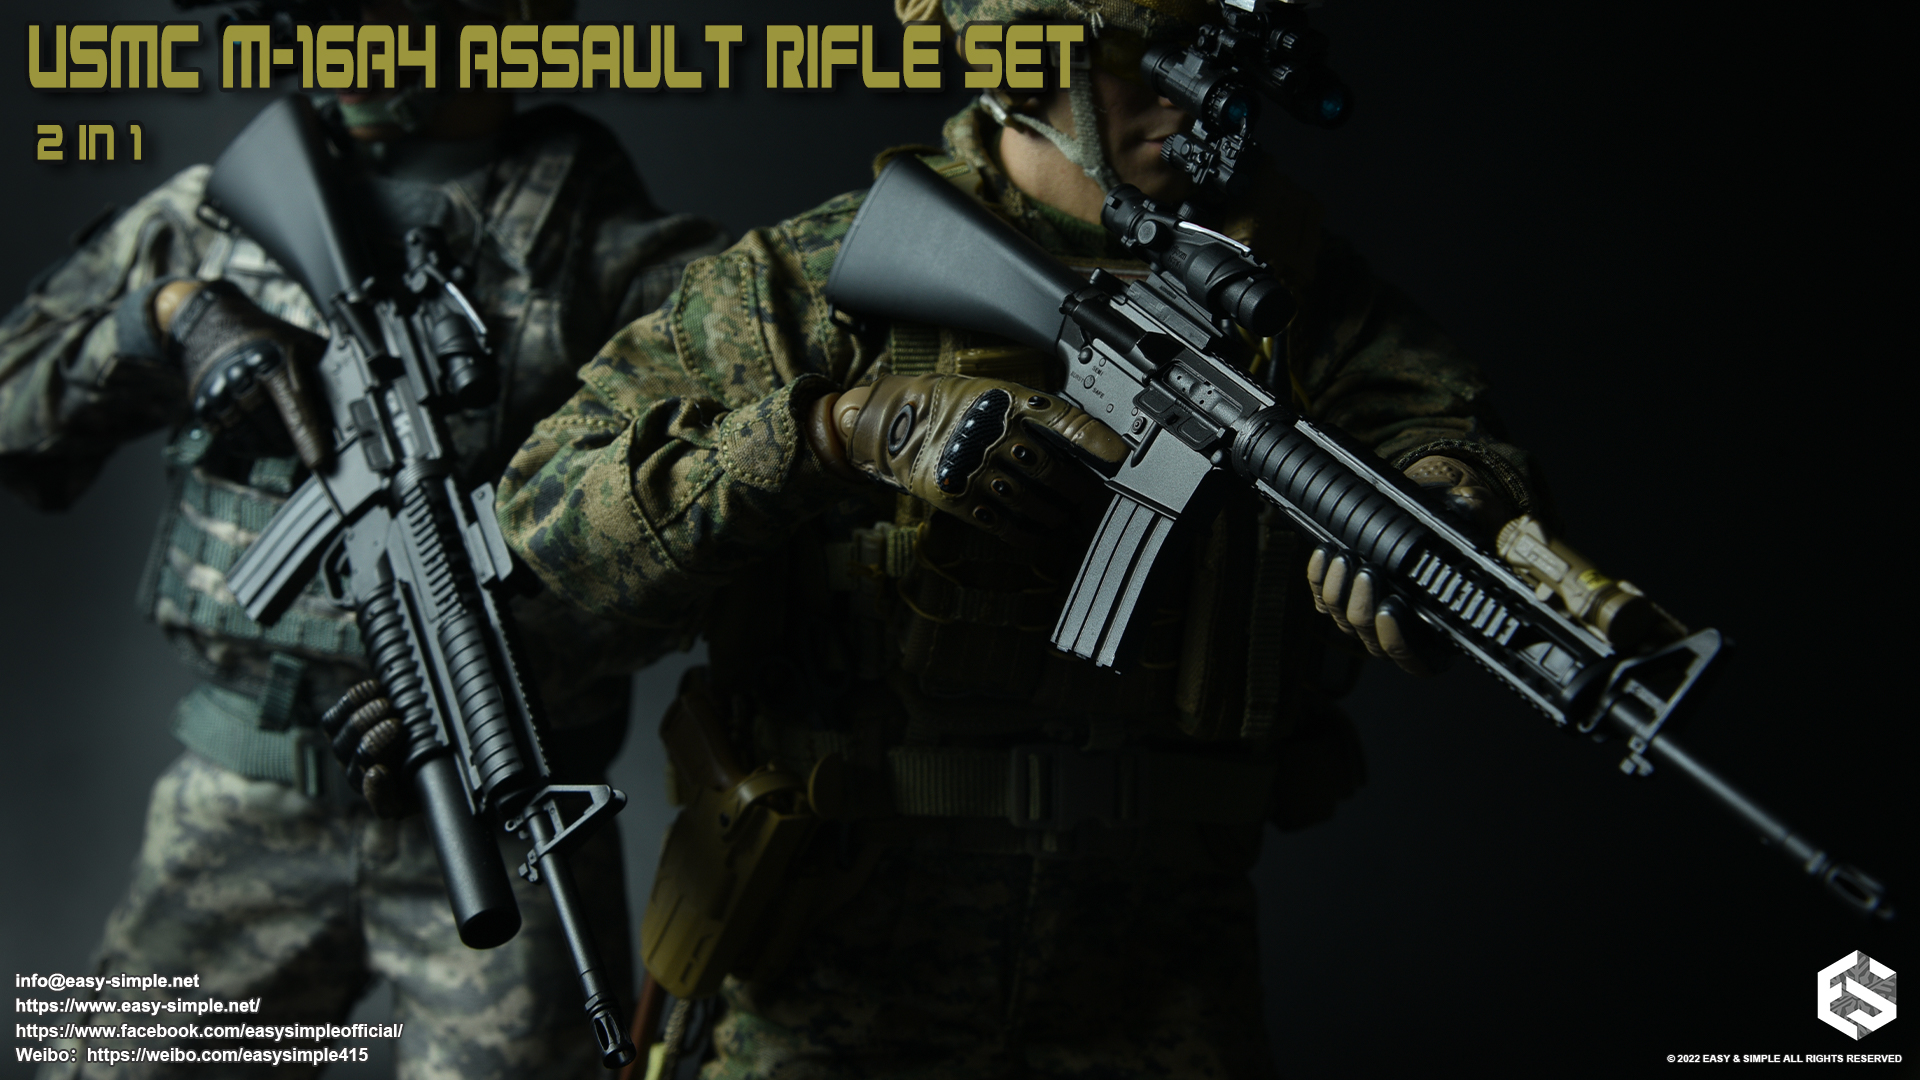 Display---Easy&Simple 06032 USMC M16A4 Assault Rifle Set 2 in 1